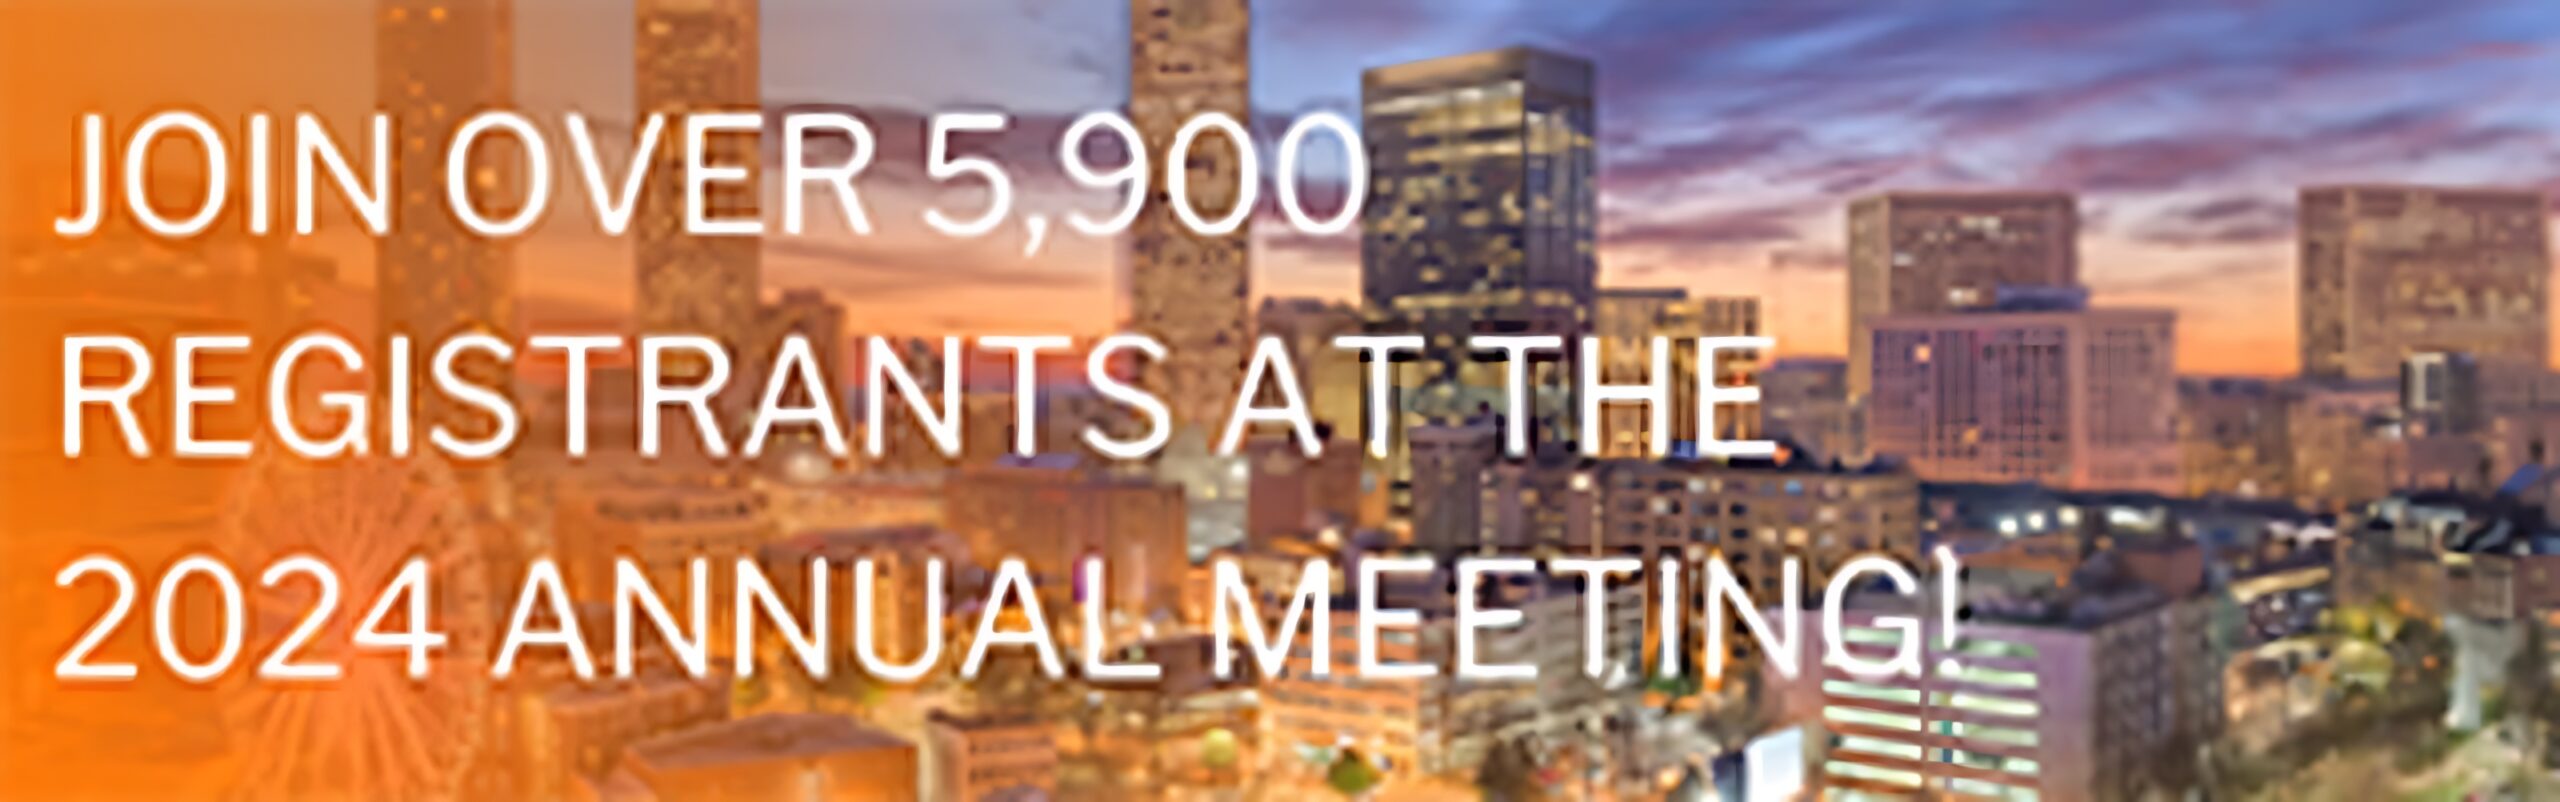 INTA-2024-annual-meeting-new